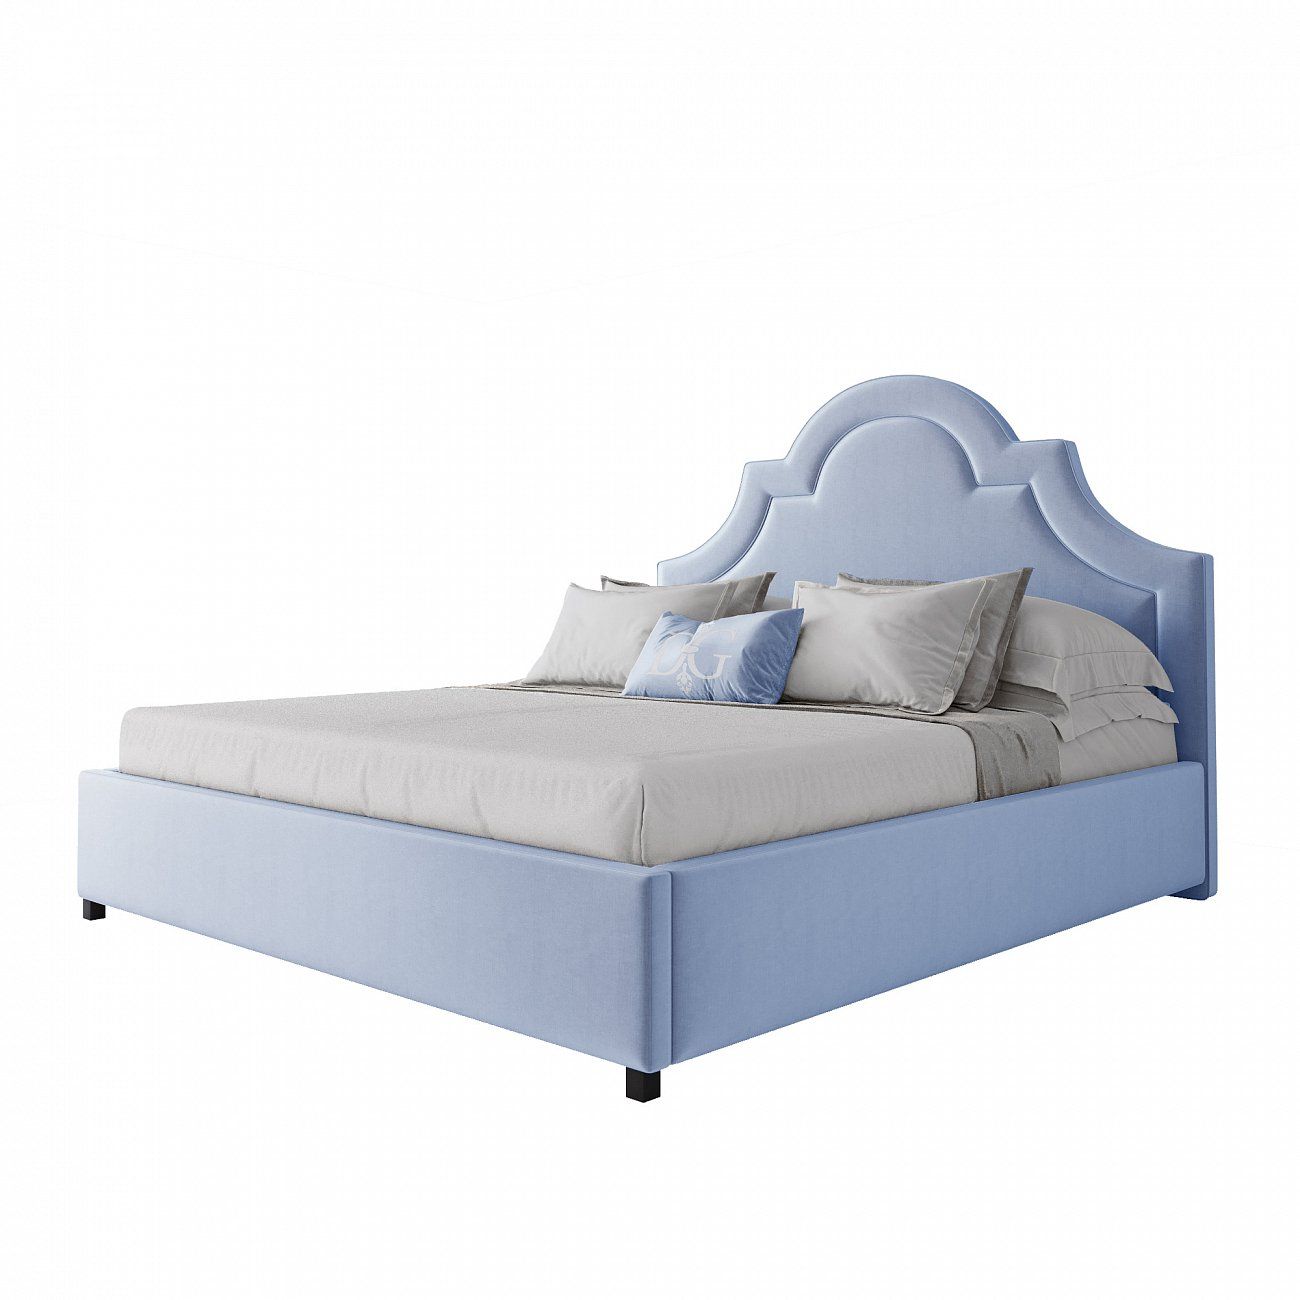 Double bed 180x200 blue Kennedy